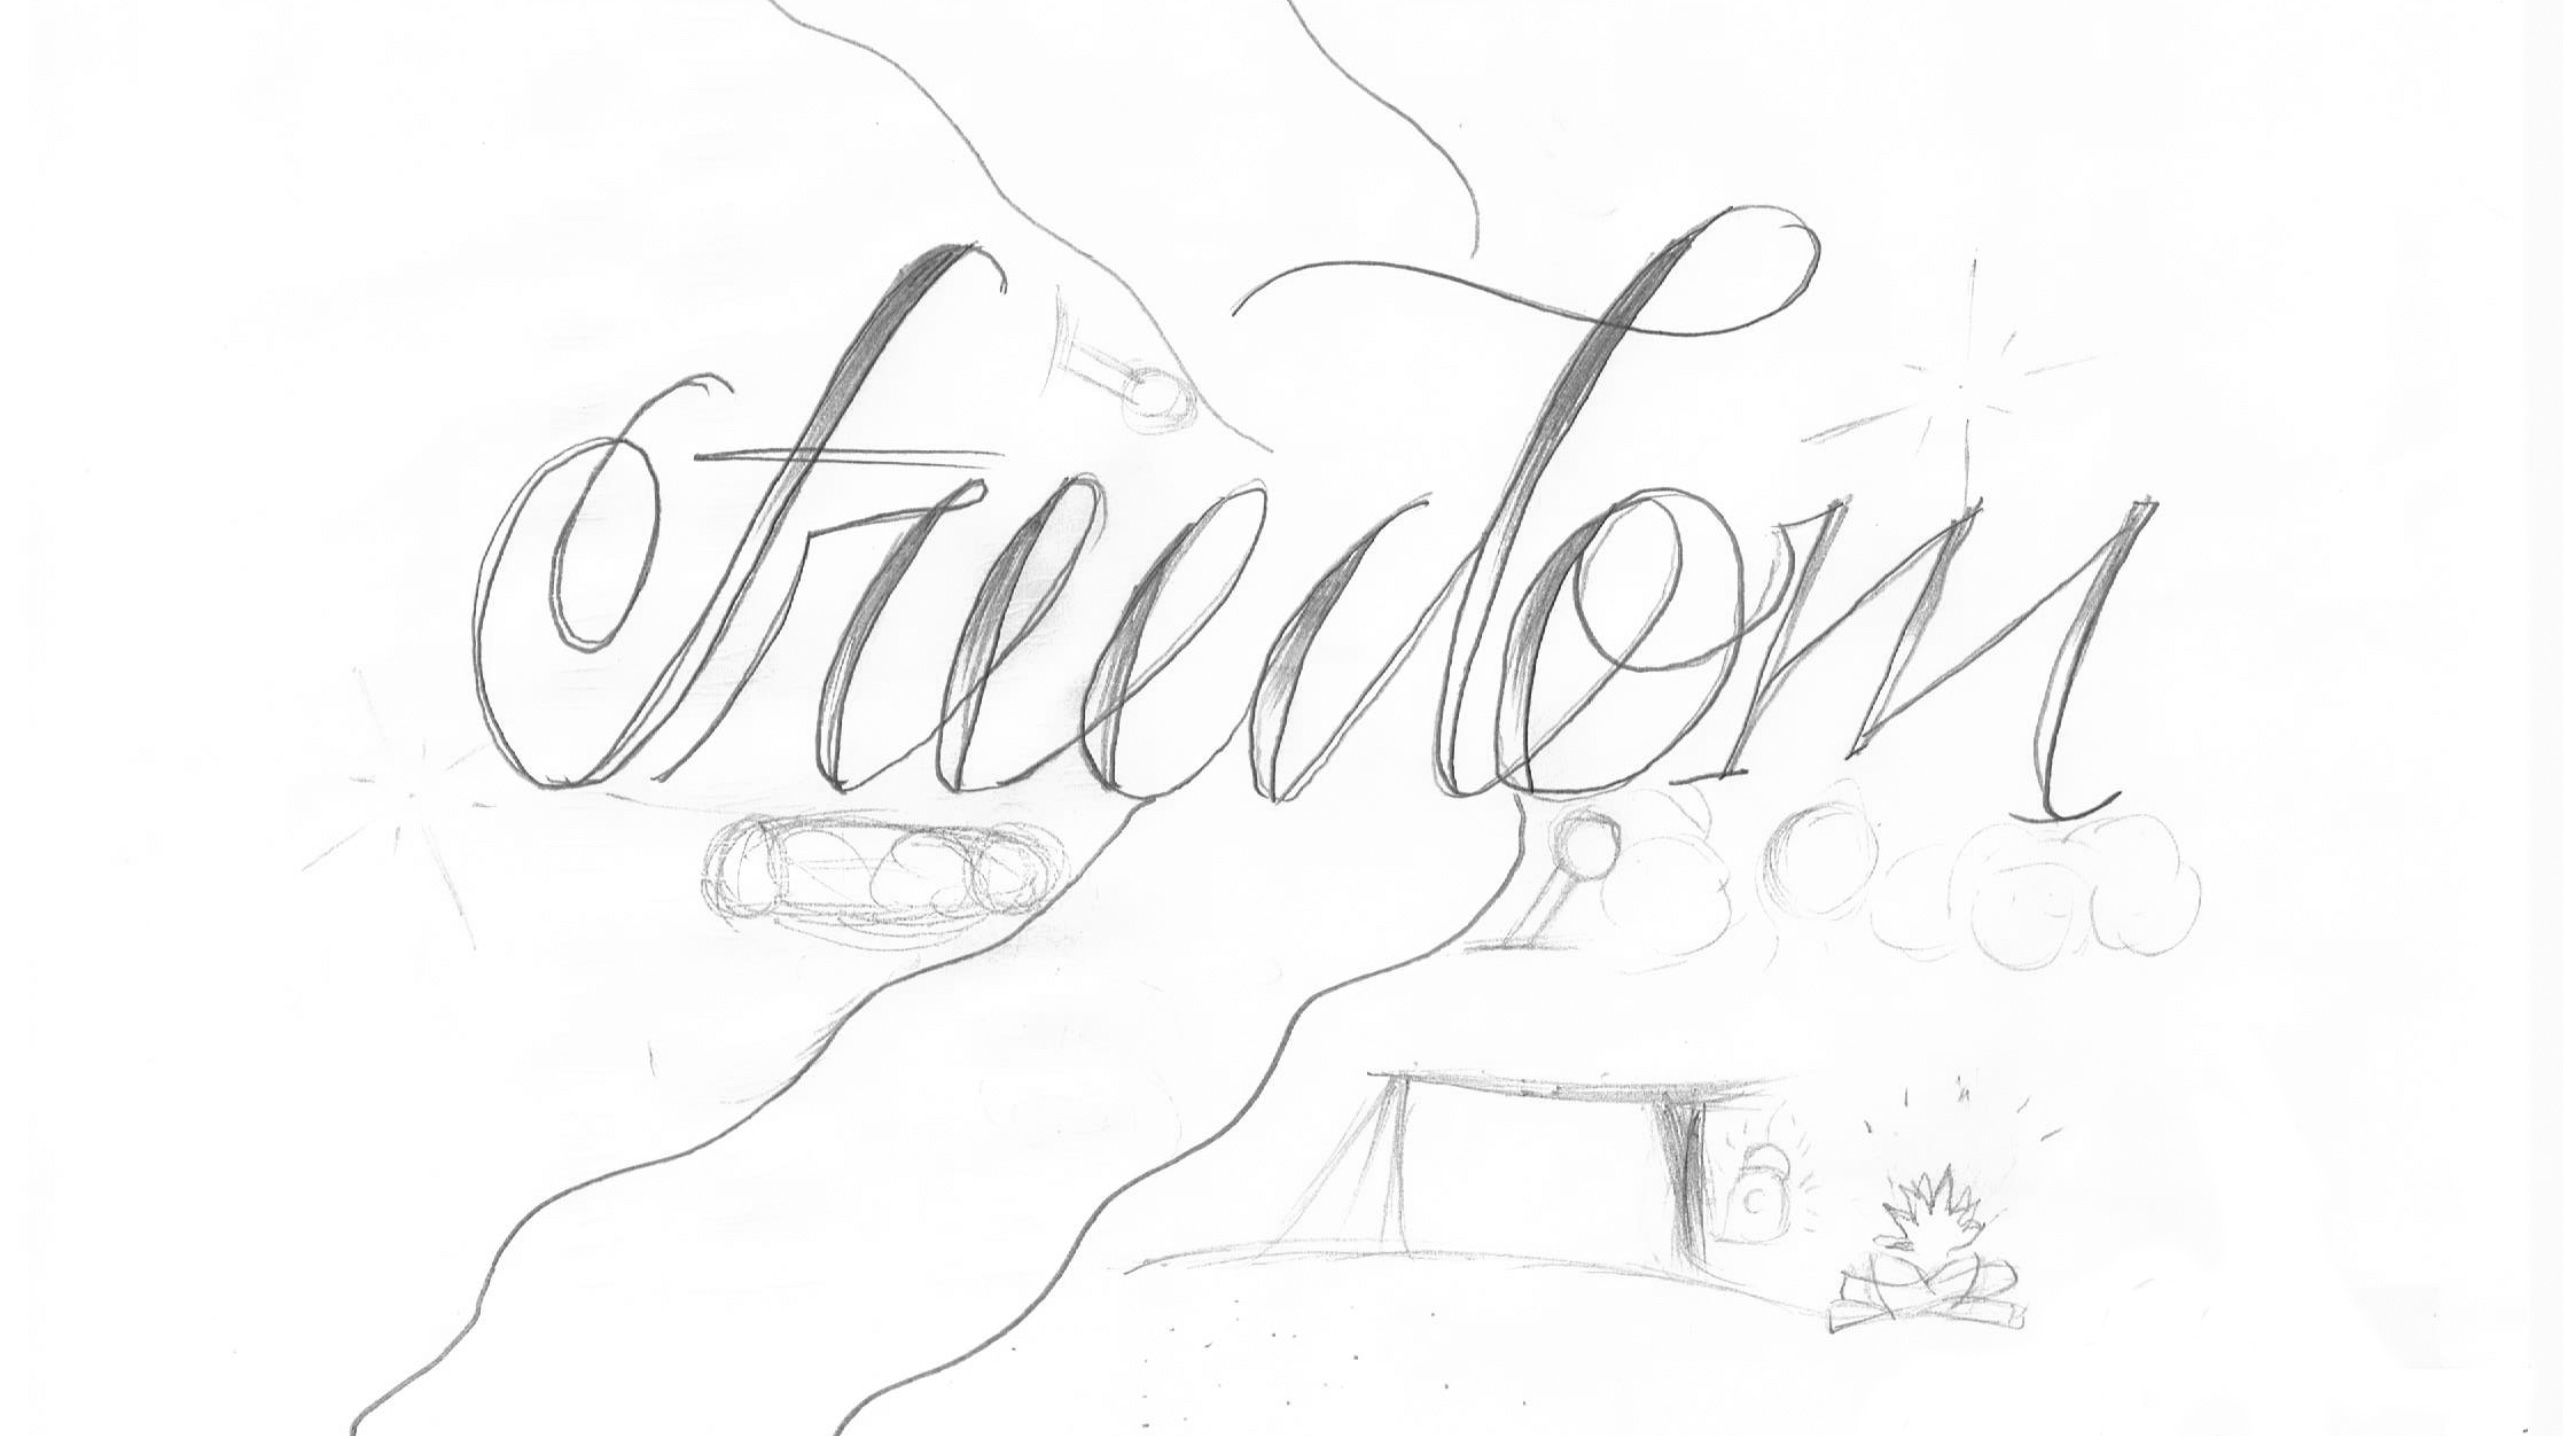 Illustration of the word “freedom” done by a writing class student at Central Juvenile Hall